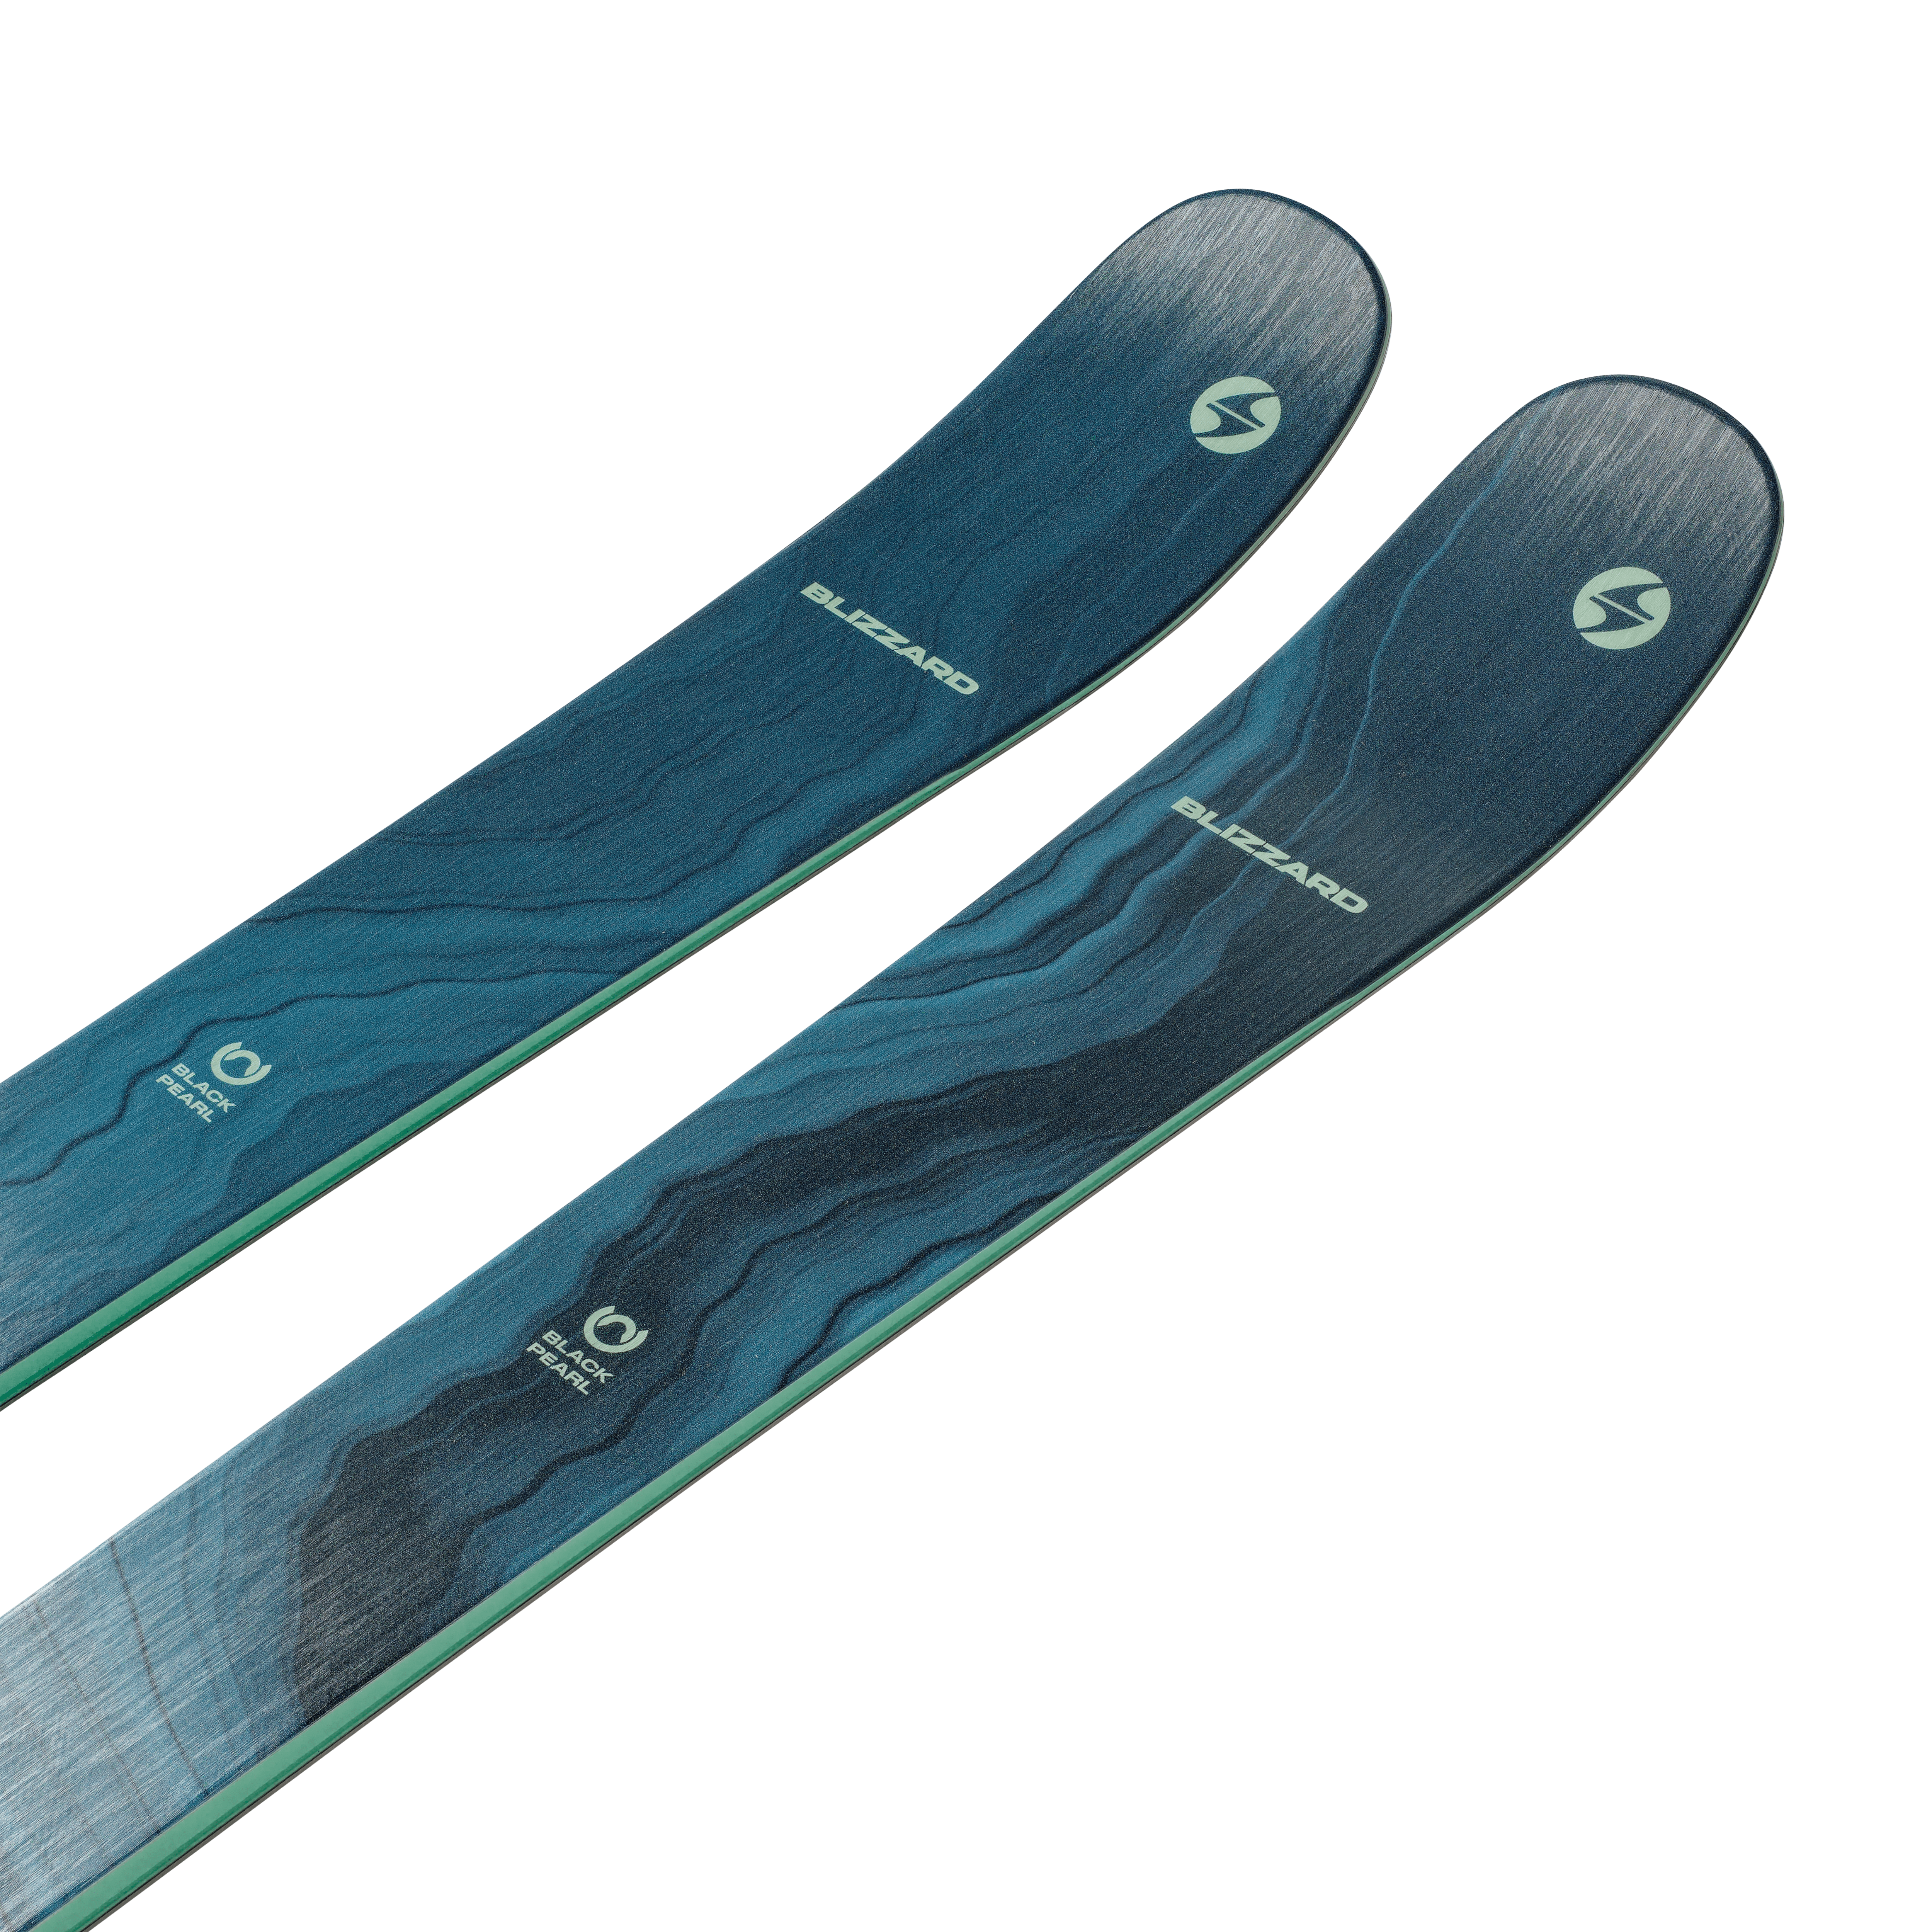 Strong at heart with an easygoing attitude, the Black Pearl 82 is the go-to choice for women who are looking for a ski that will be there for them when they want to rip the groomers, but is easy and forgiving when it's time to cruise. 